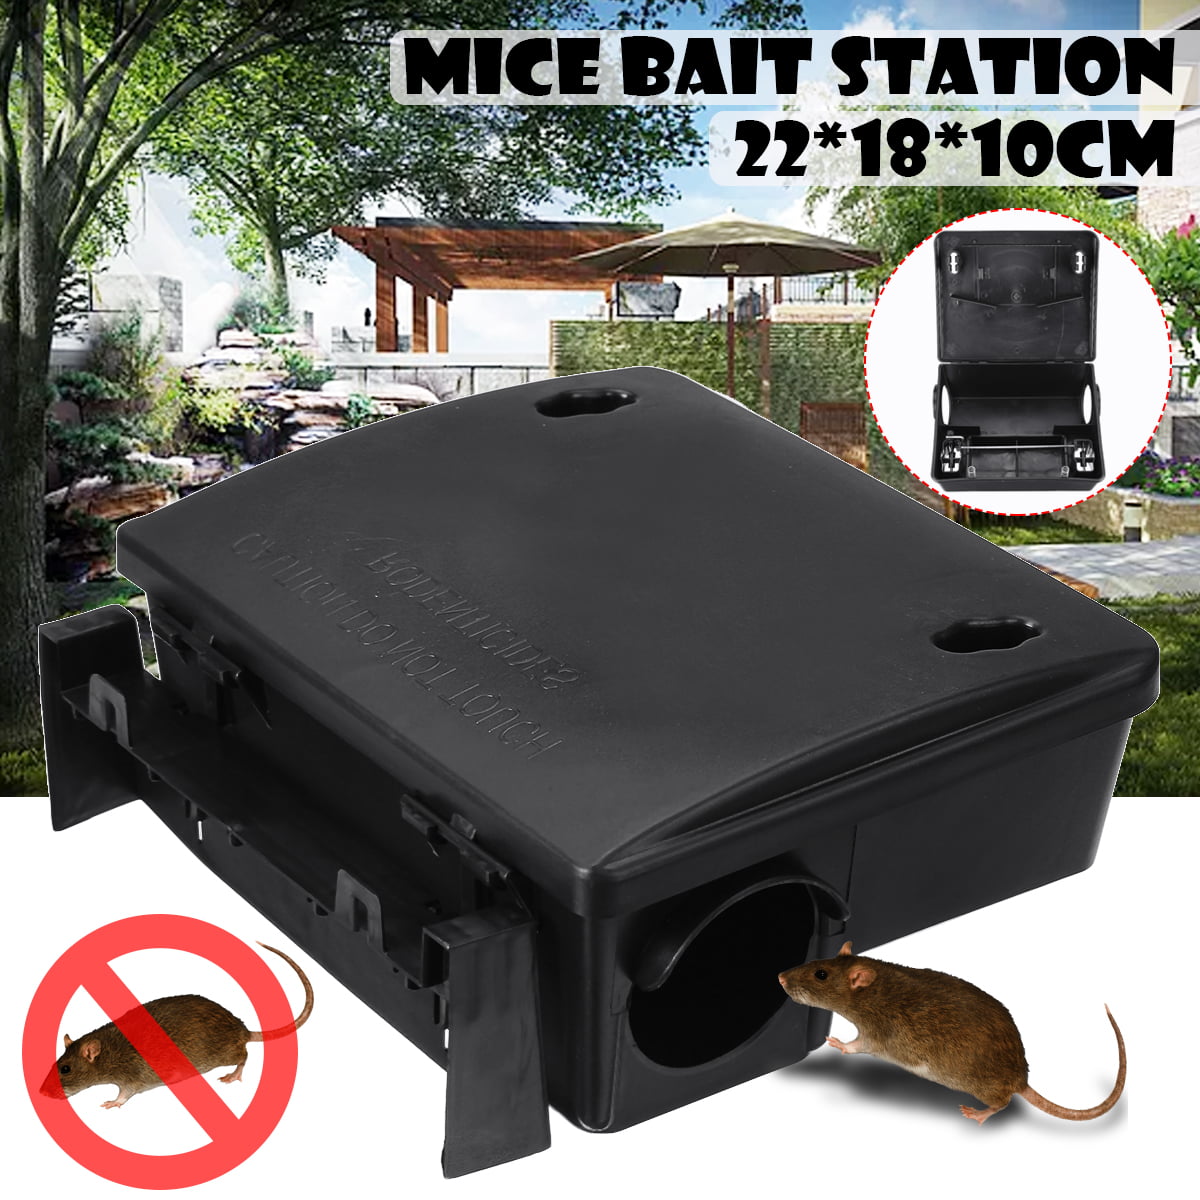 MOUSE BAIT STAIONS FOR MICE PEST CONTROL FULLY LOCKABLE WITH KEY 